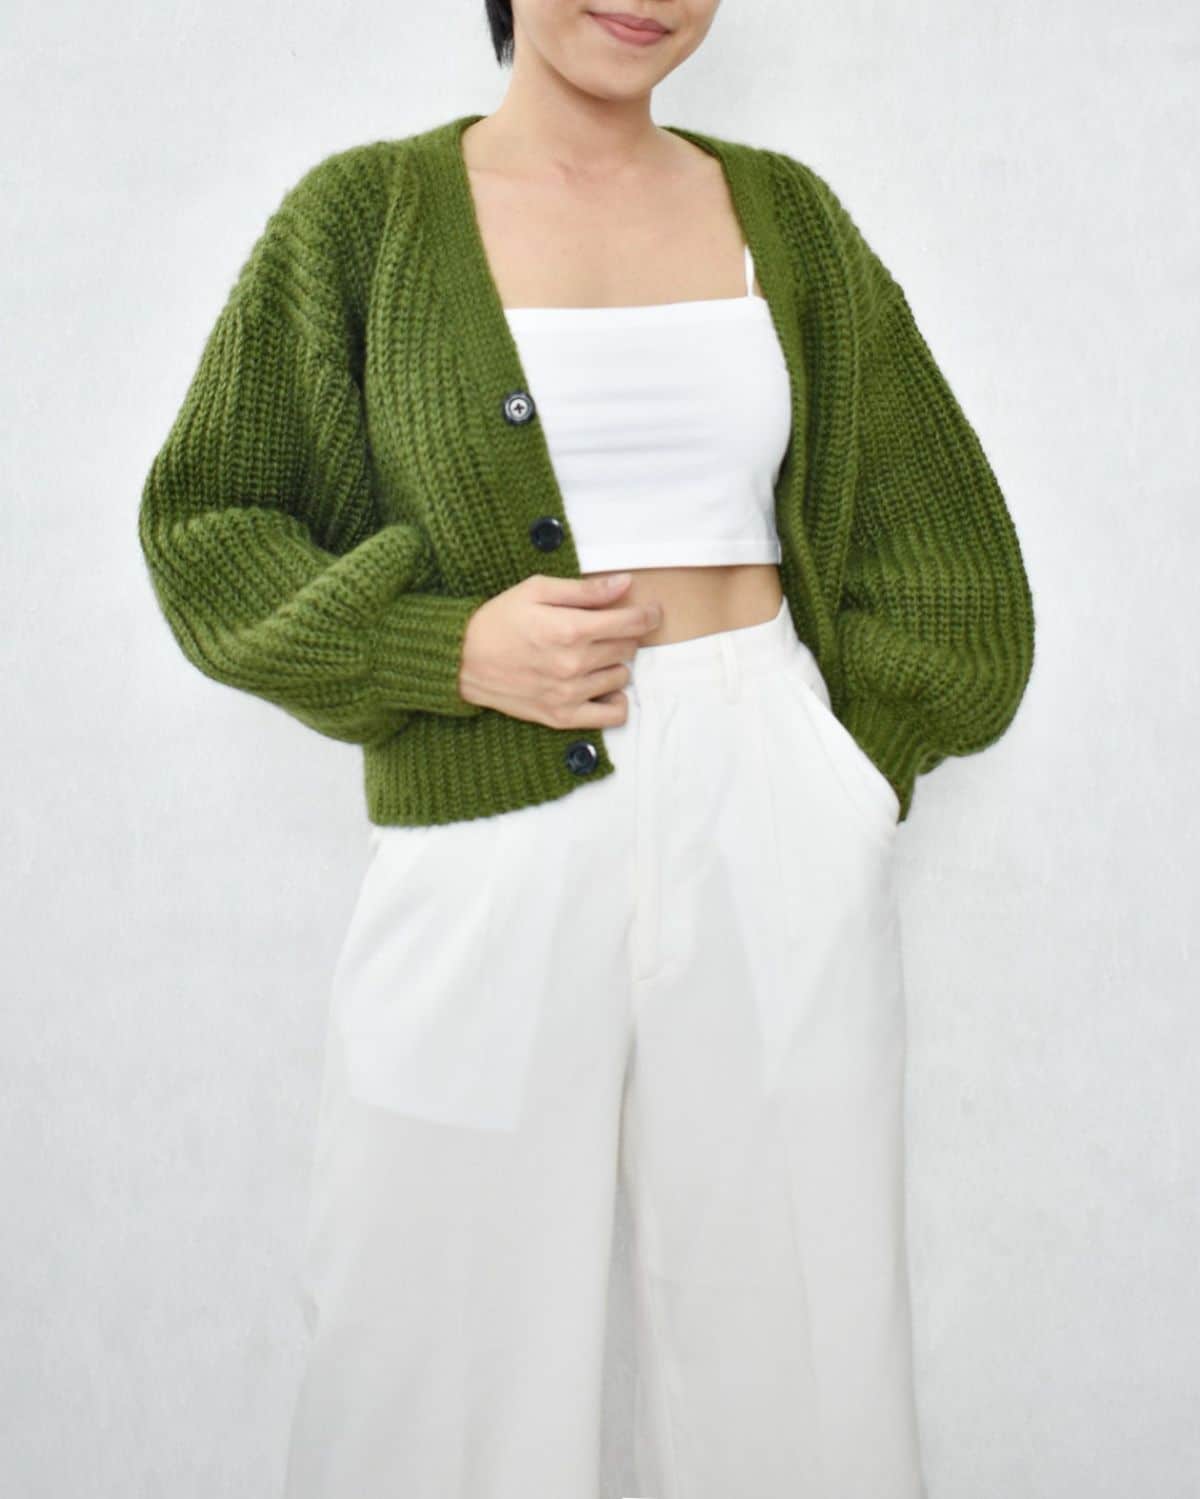 A woman in a white top and trousers wearing a chunky crochet green hip-length cardigan with balloon sleeves and cuffs at the bottom.